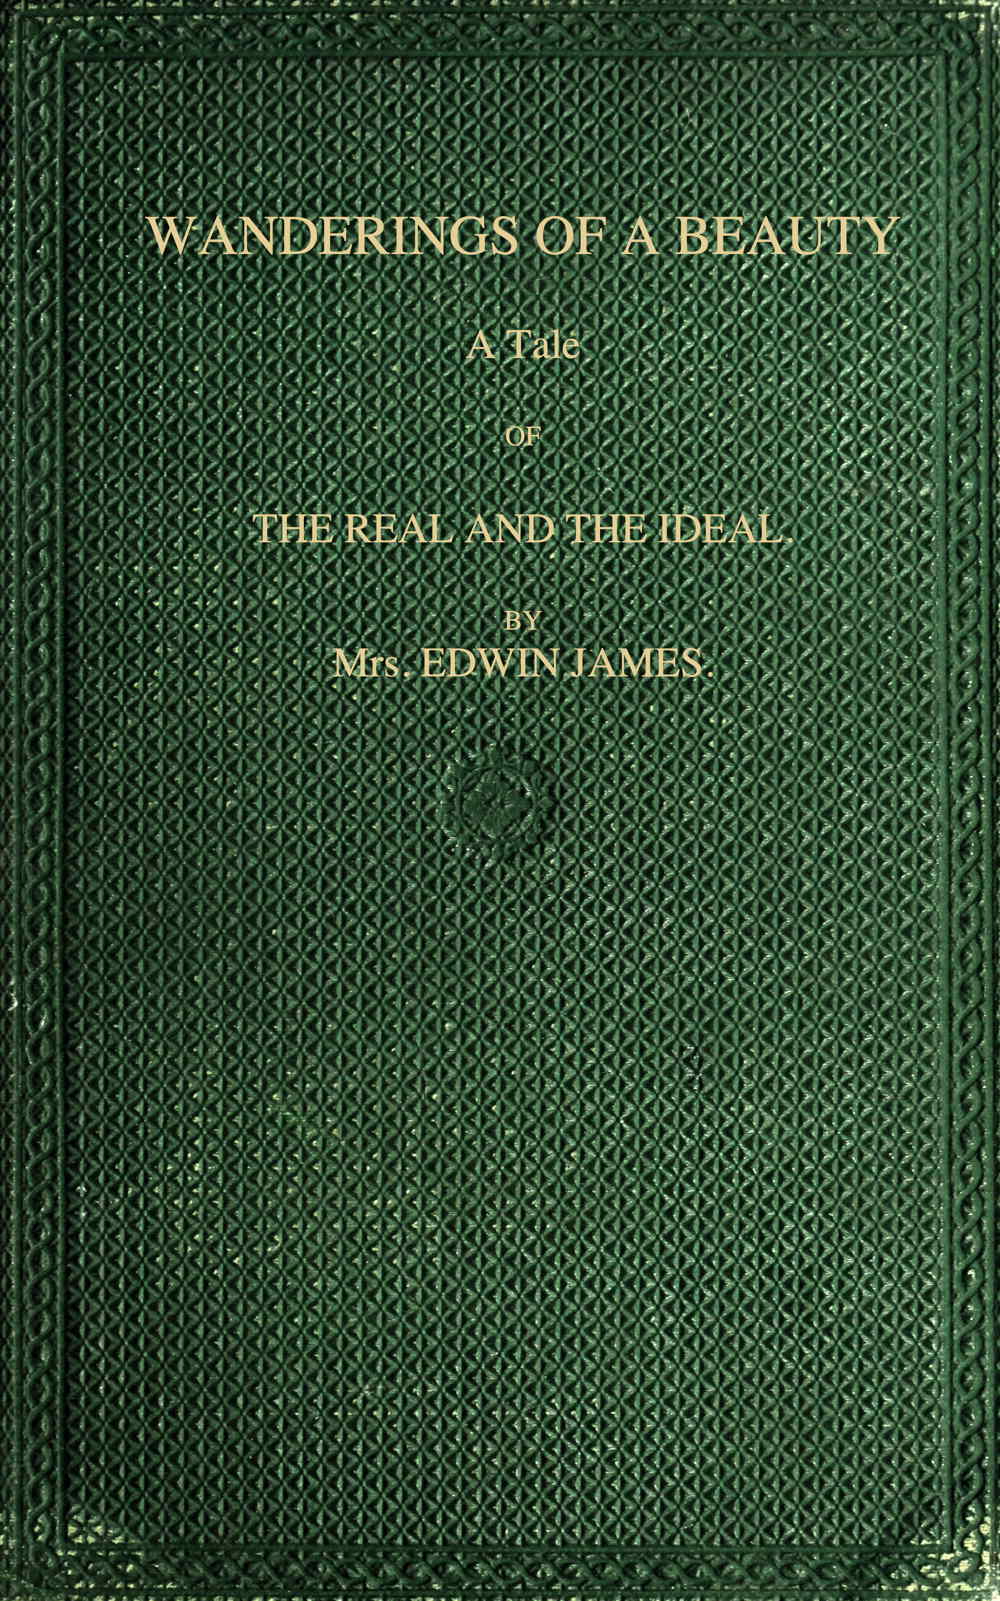 Wanderings of a Beauty. A Tale of the Real and the Ideal, by Mrs. Edwin  James.—A Project Gutenberg eBook